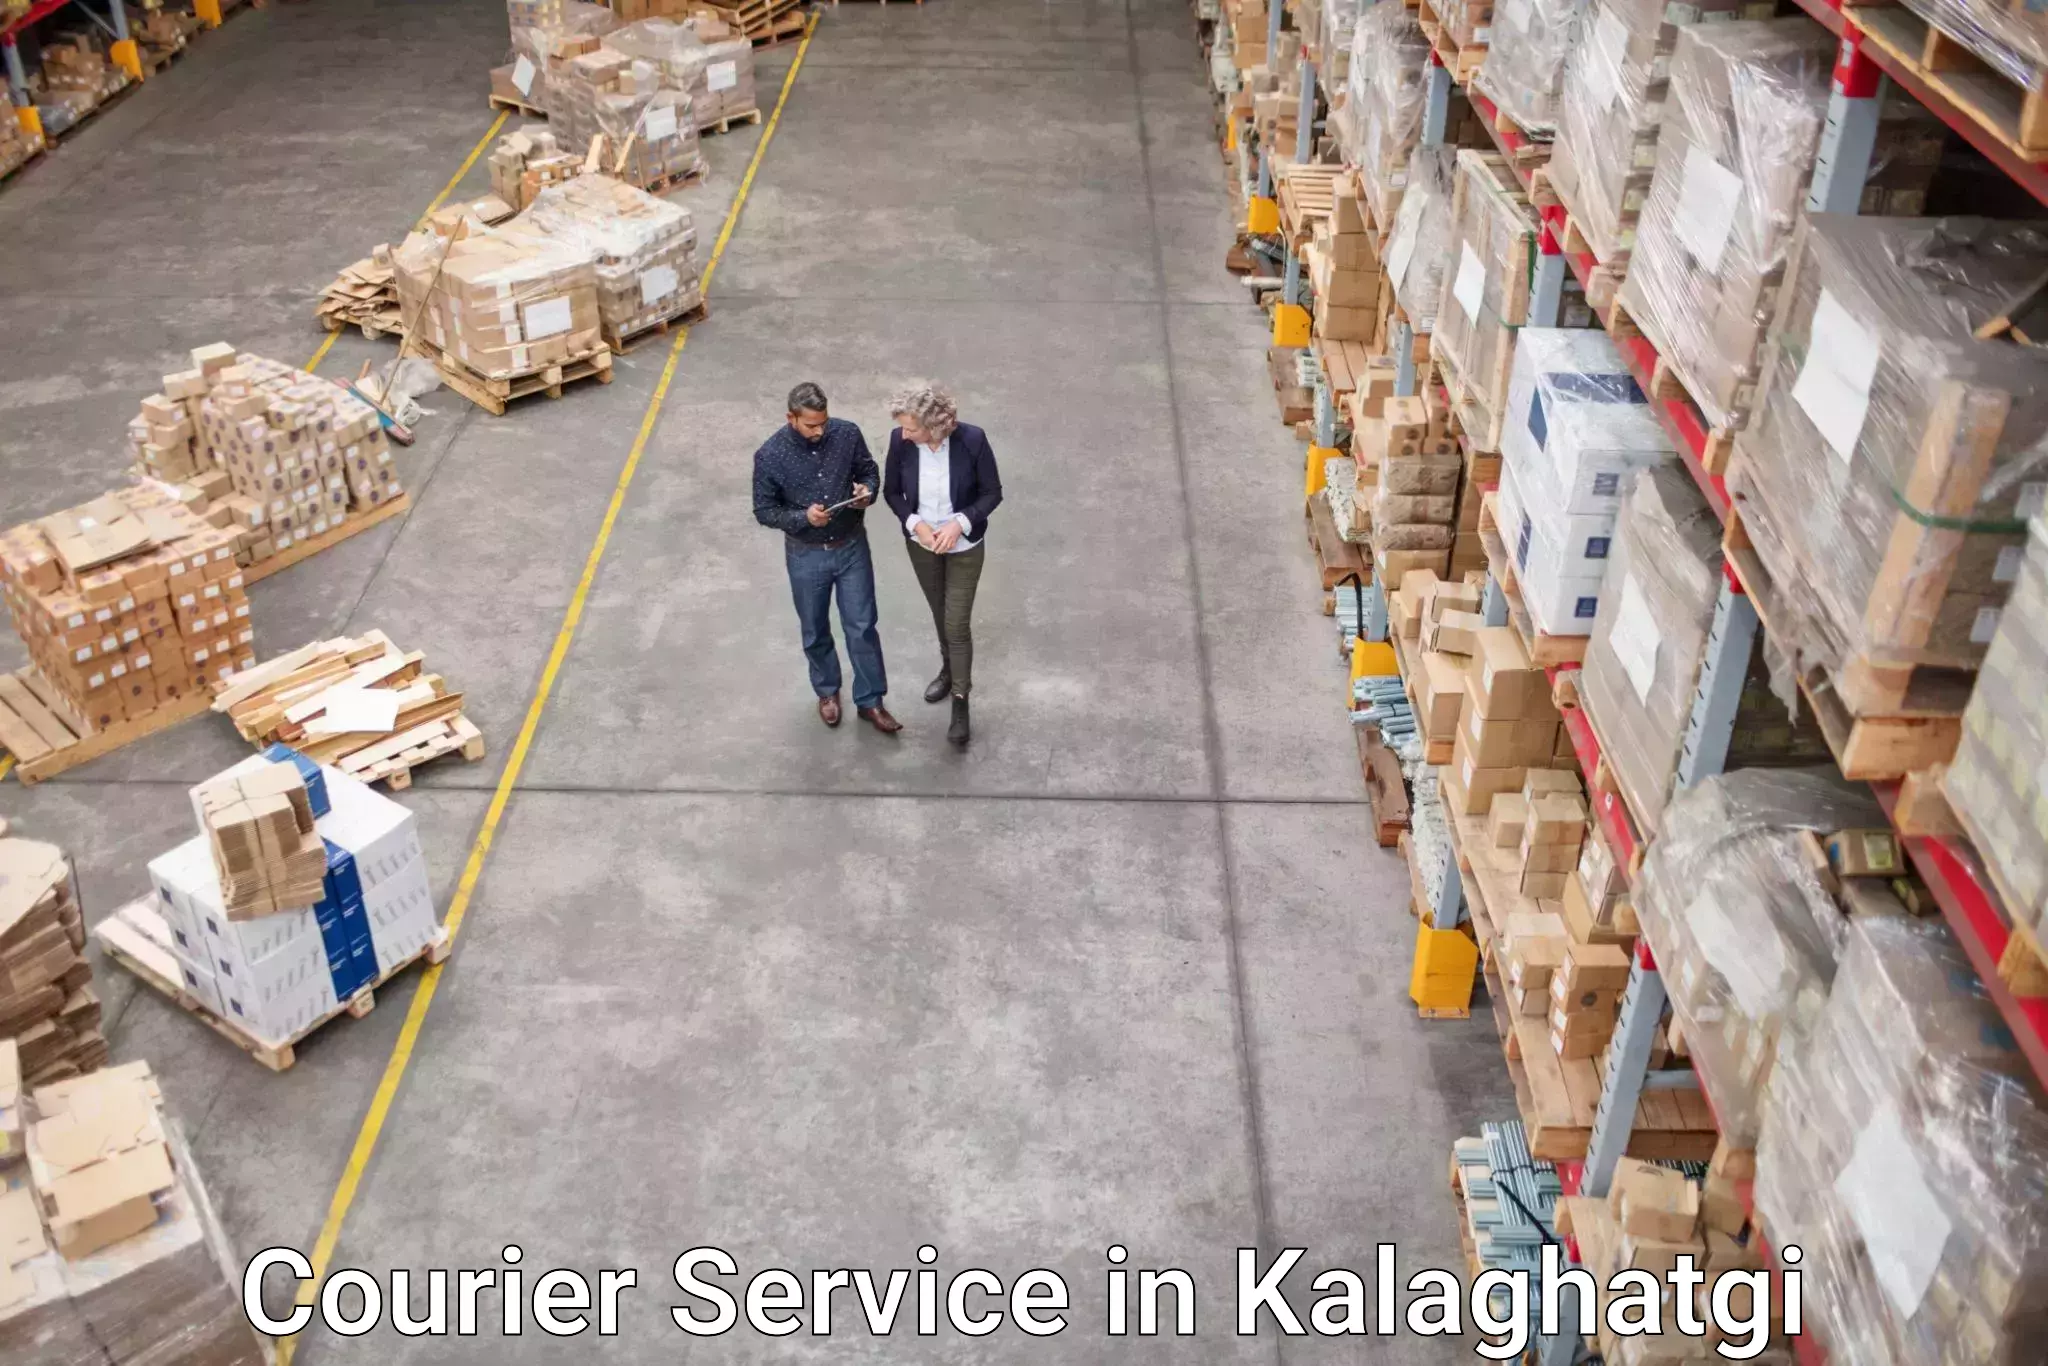 Enhanced delivery experience in Kalaghatgi